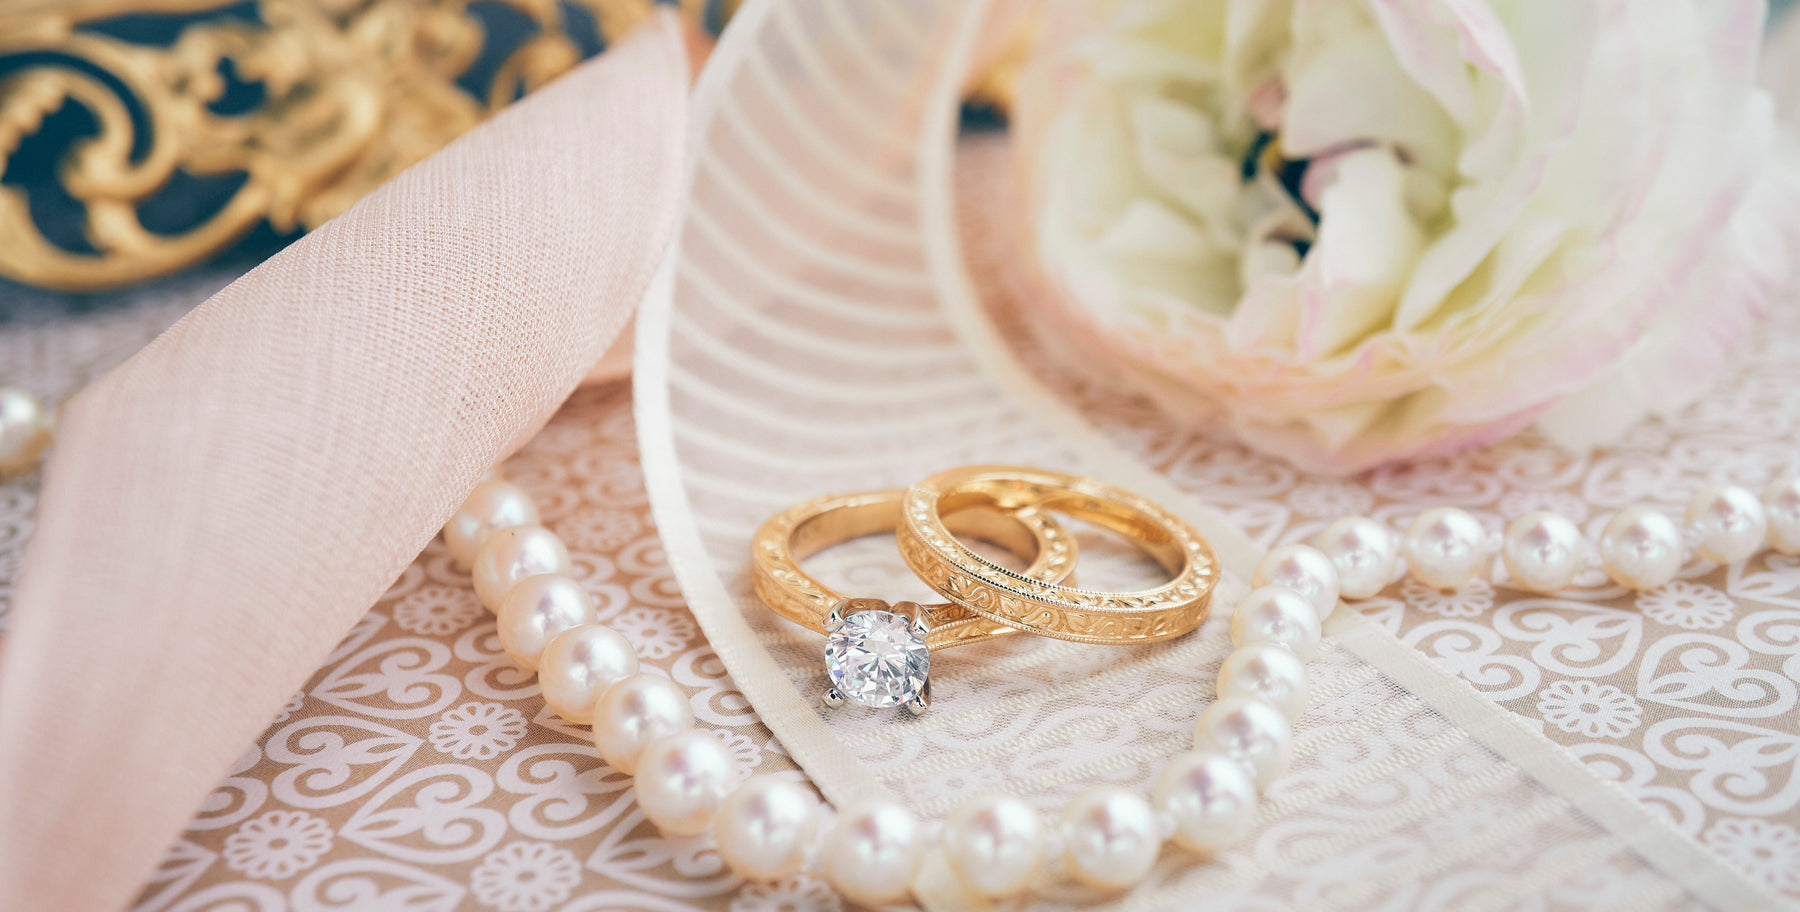 Diamond engagement ring, wedding band, and pearl necklace